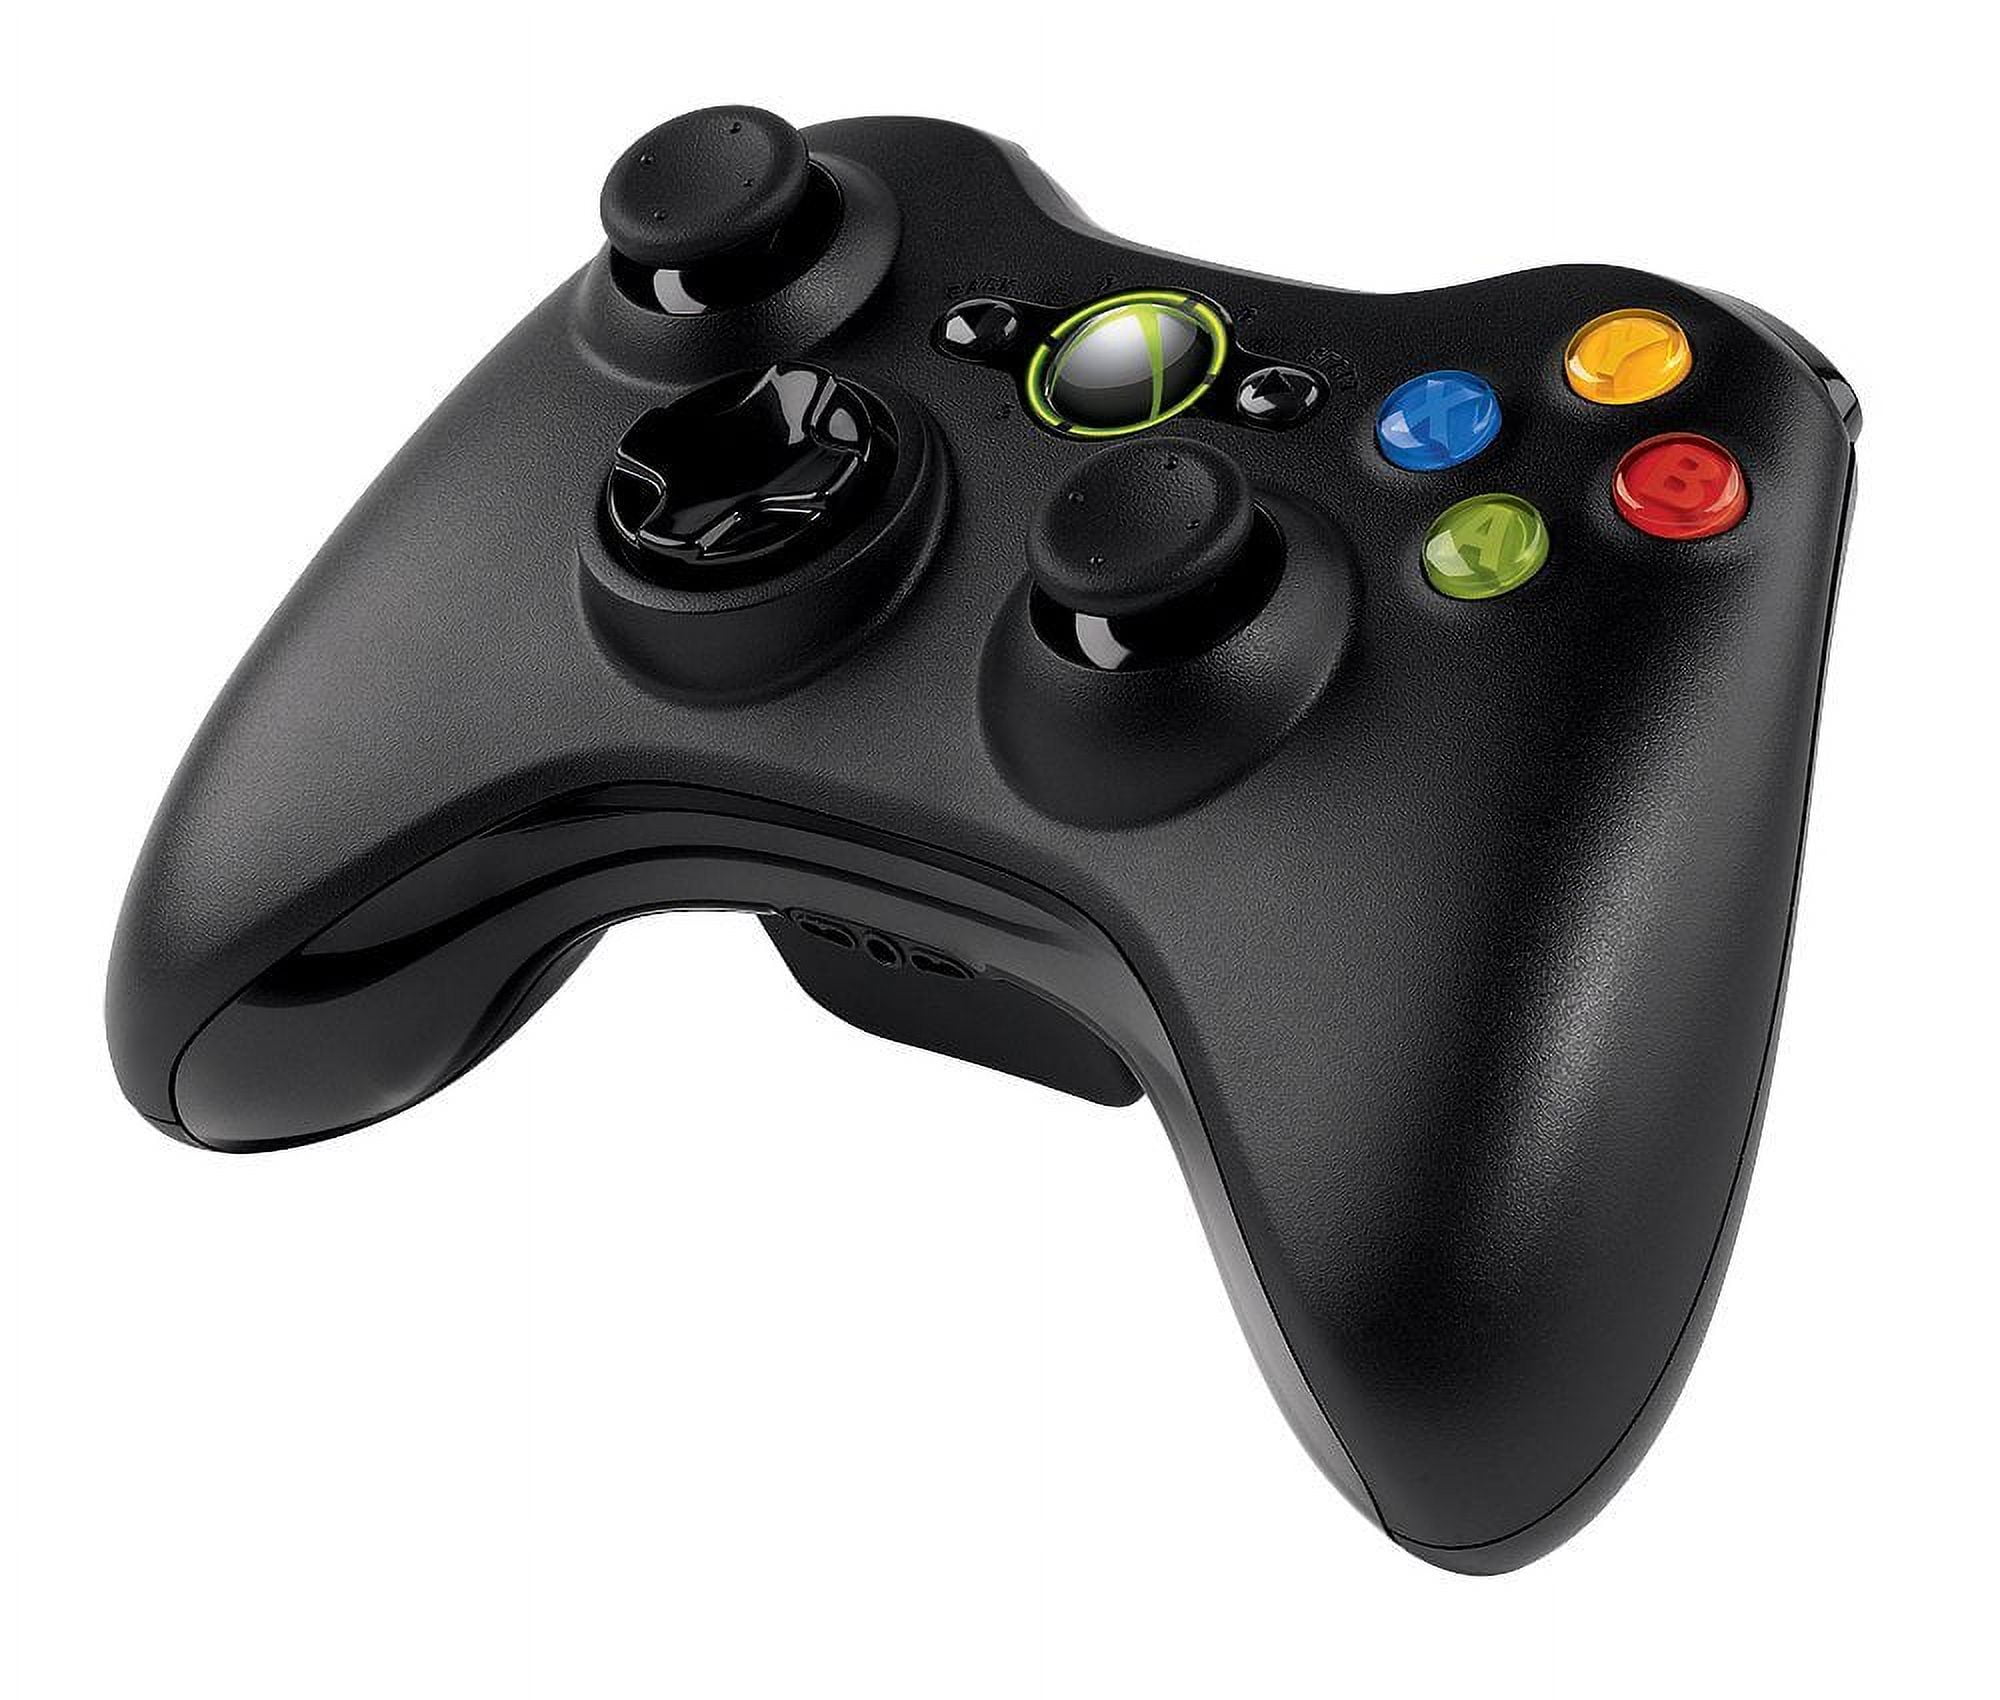 A Close-up Front View of the Used Lying XBOX 360 Slim Corona 250GB Console  and Two Gamepads Editorial Stock Image - Image of gaming, view: 213836204